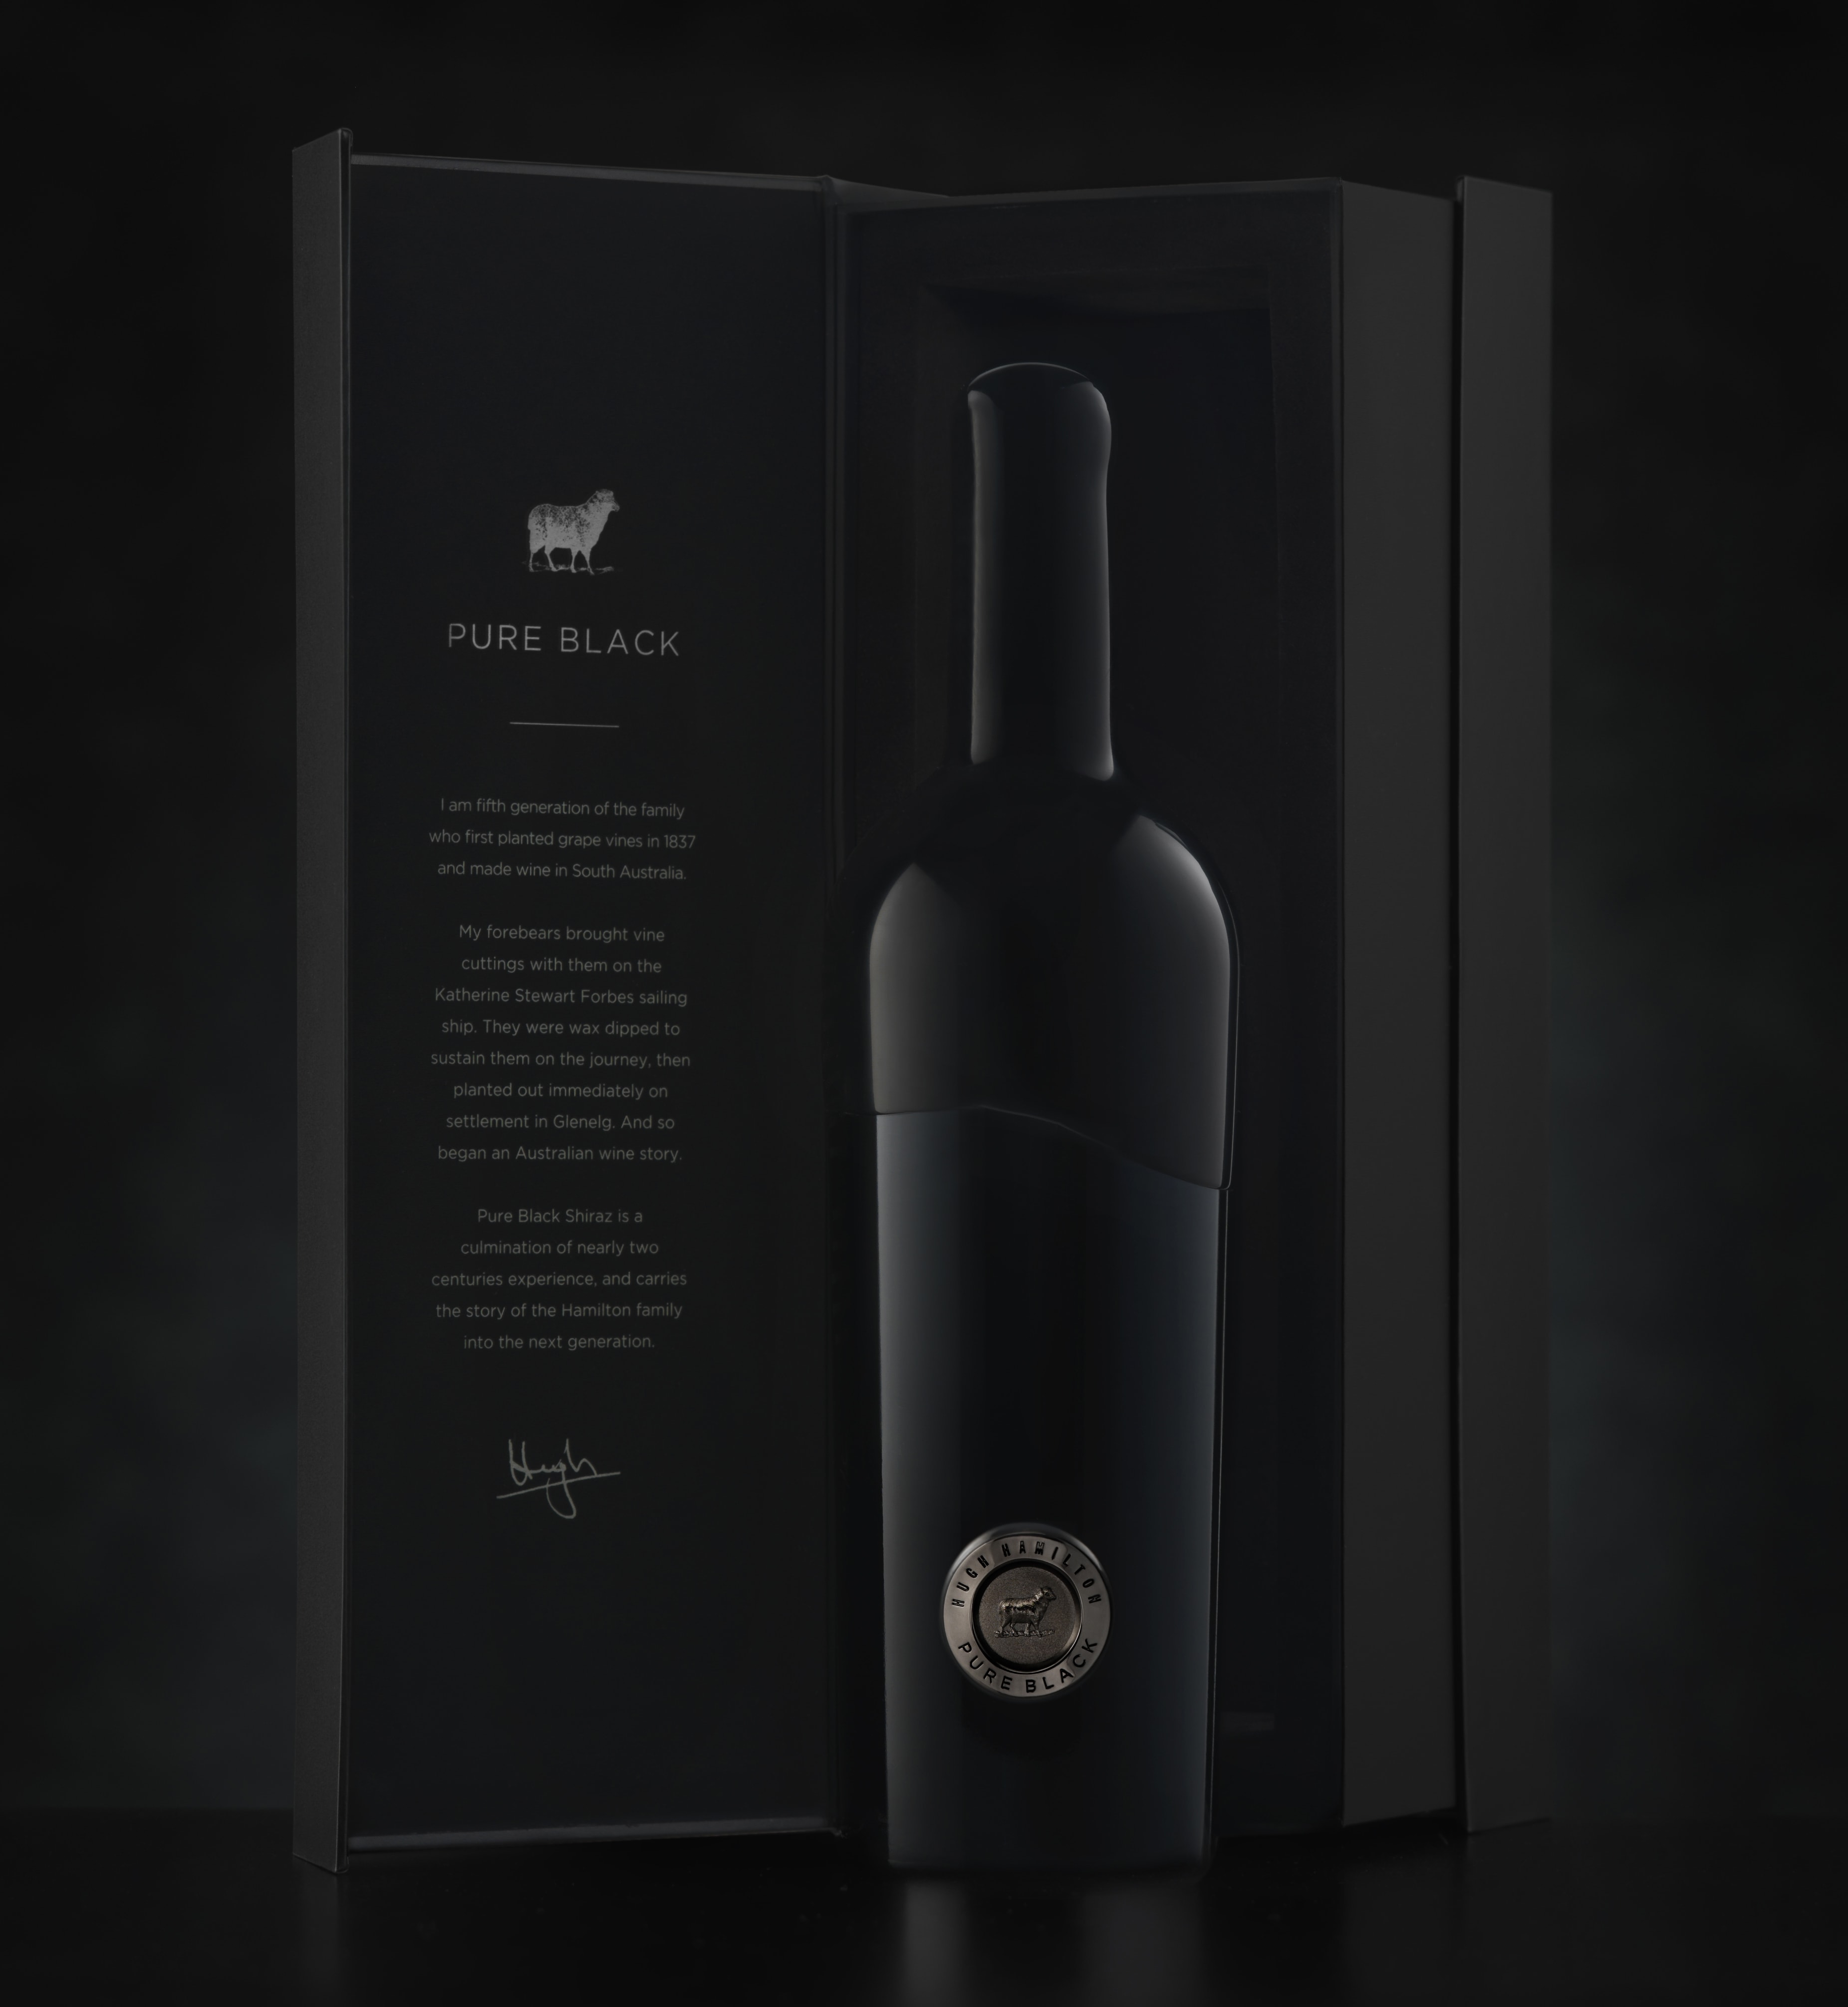 A photo of a black bottle of wine, posed in front of a black backdrop next to an open box for the wine, the Hugh Hamilton 'Pure Black' circular label placed near the bottom of the bottle, 